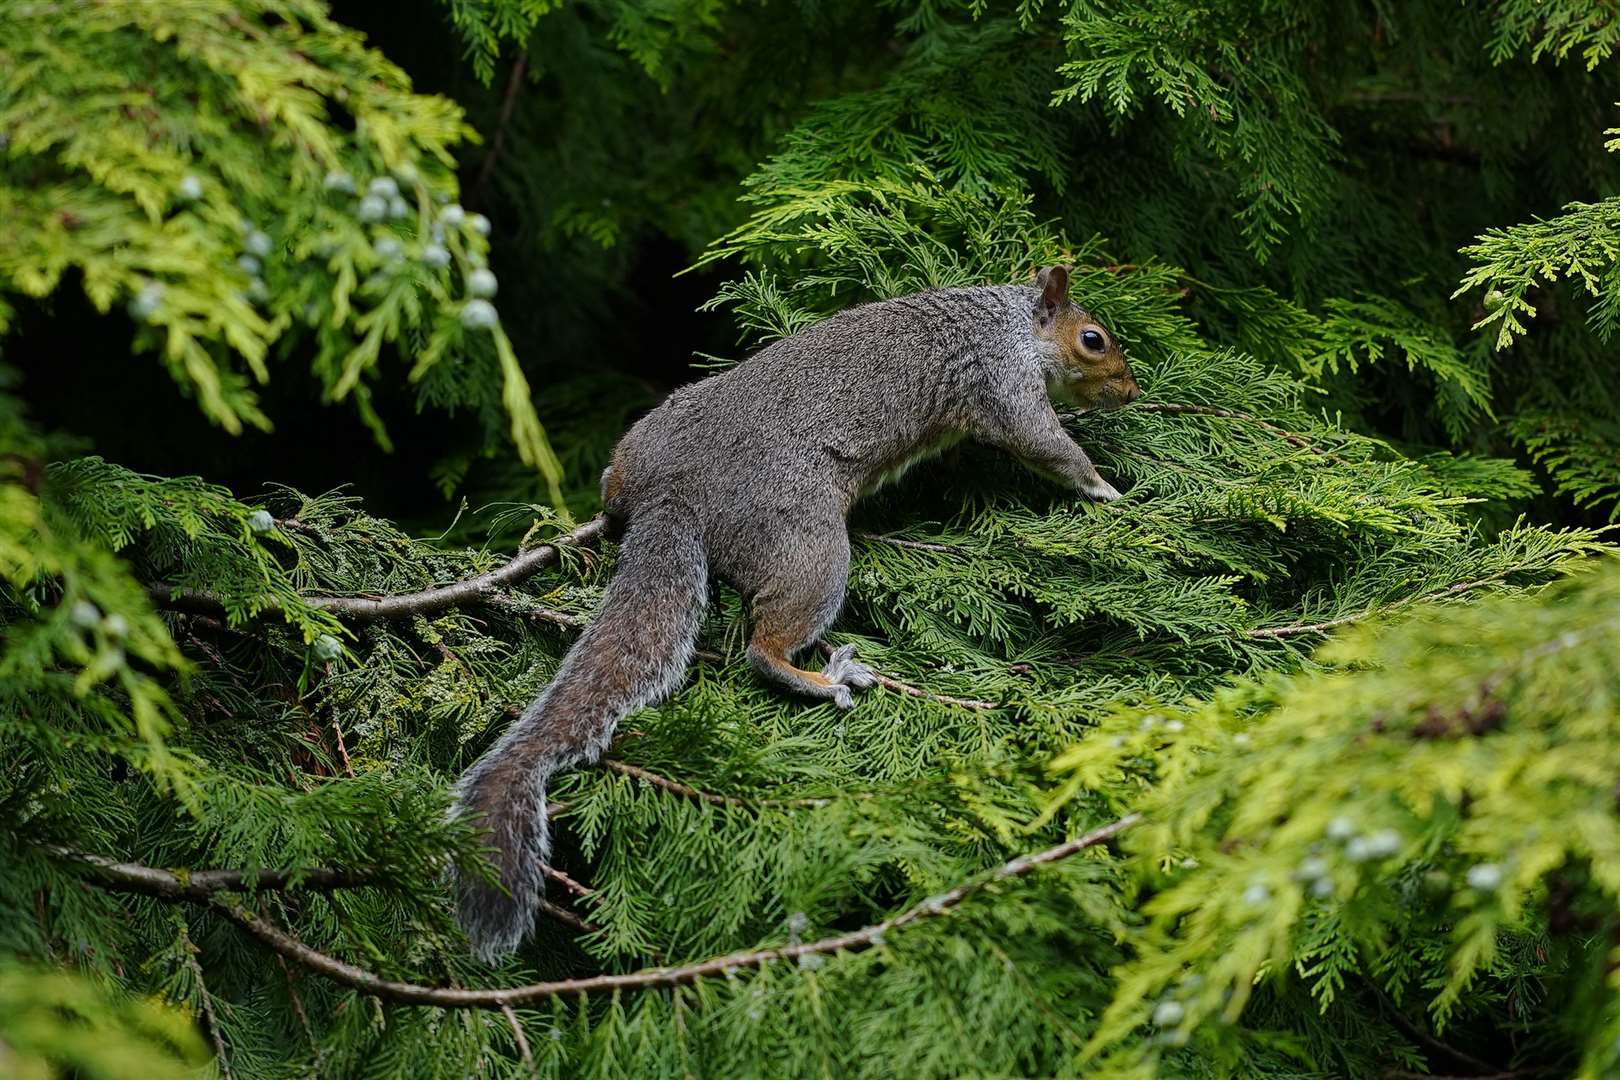 Grey squirrels are one example of the invasive species that are displacing UK wildlife (Peter Byrne/PA)